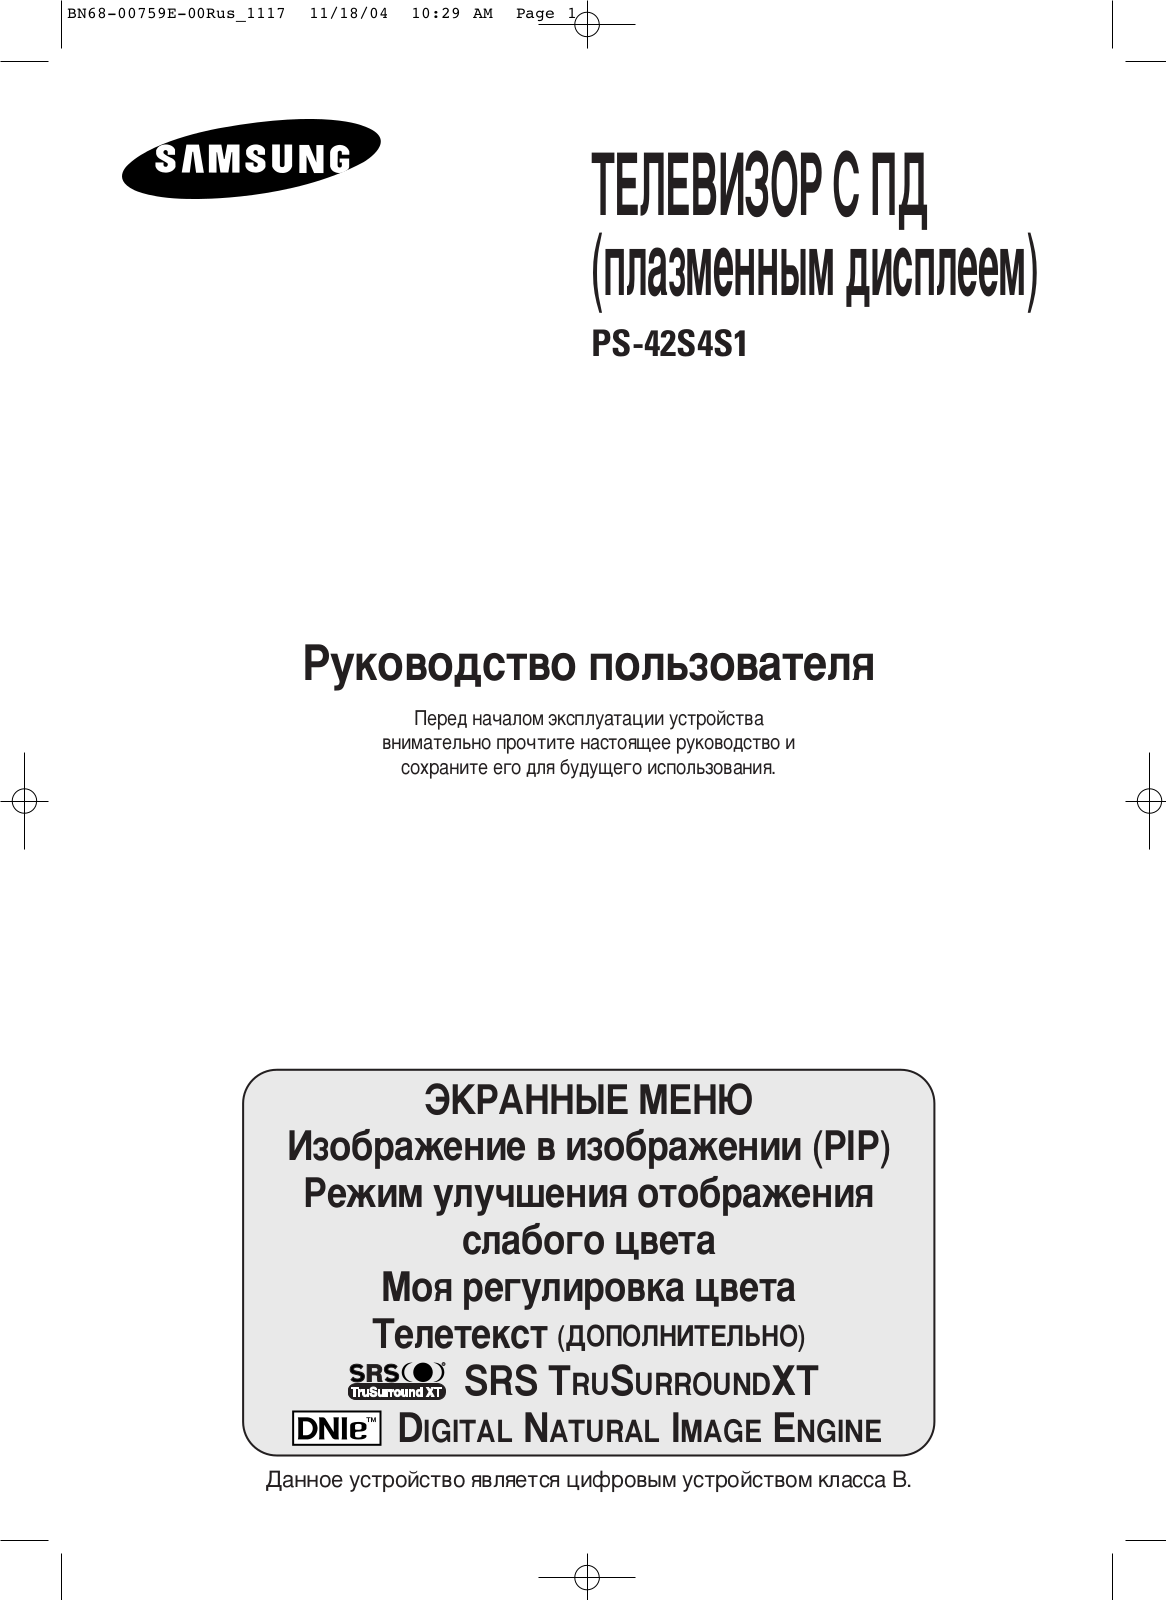 Samsung PS-42S4S1R User Manual